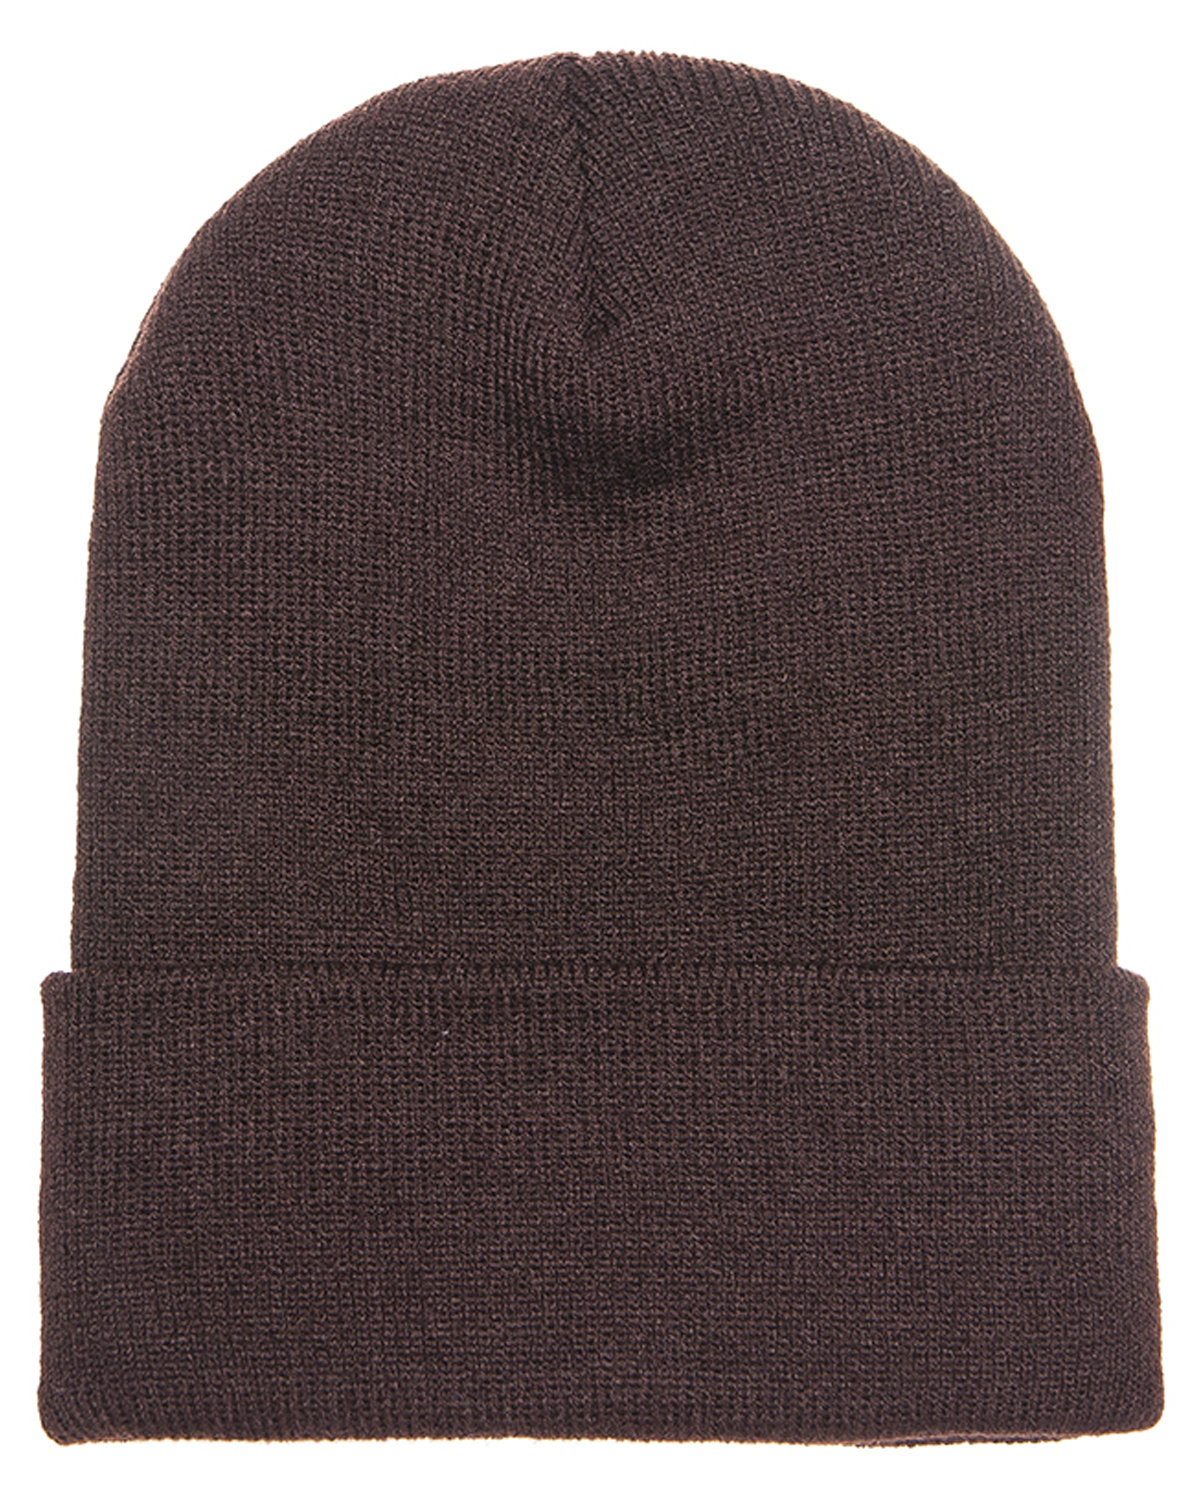 | Yupoong Beanie Cuffed Adult Knit alphabroder